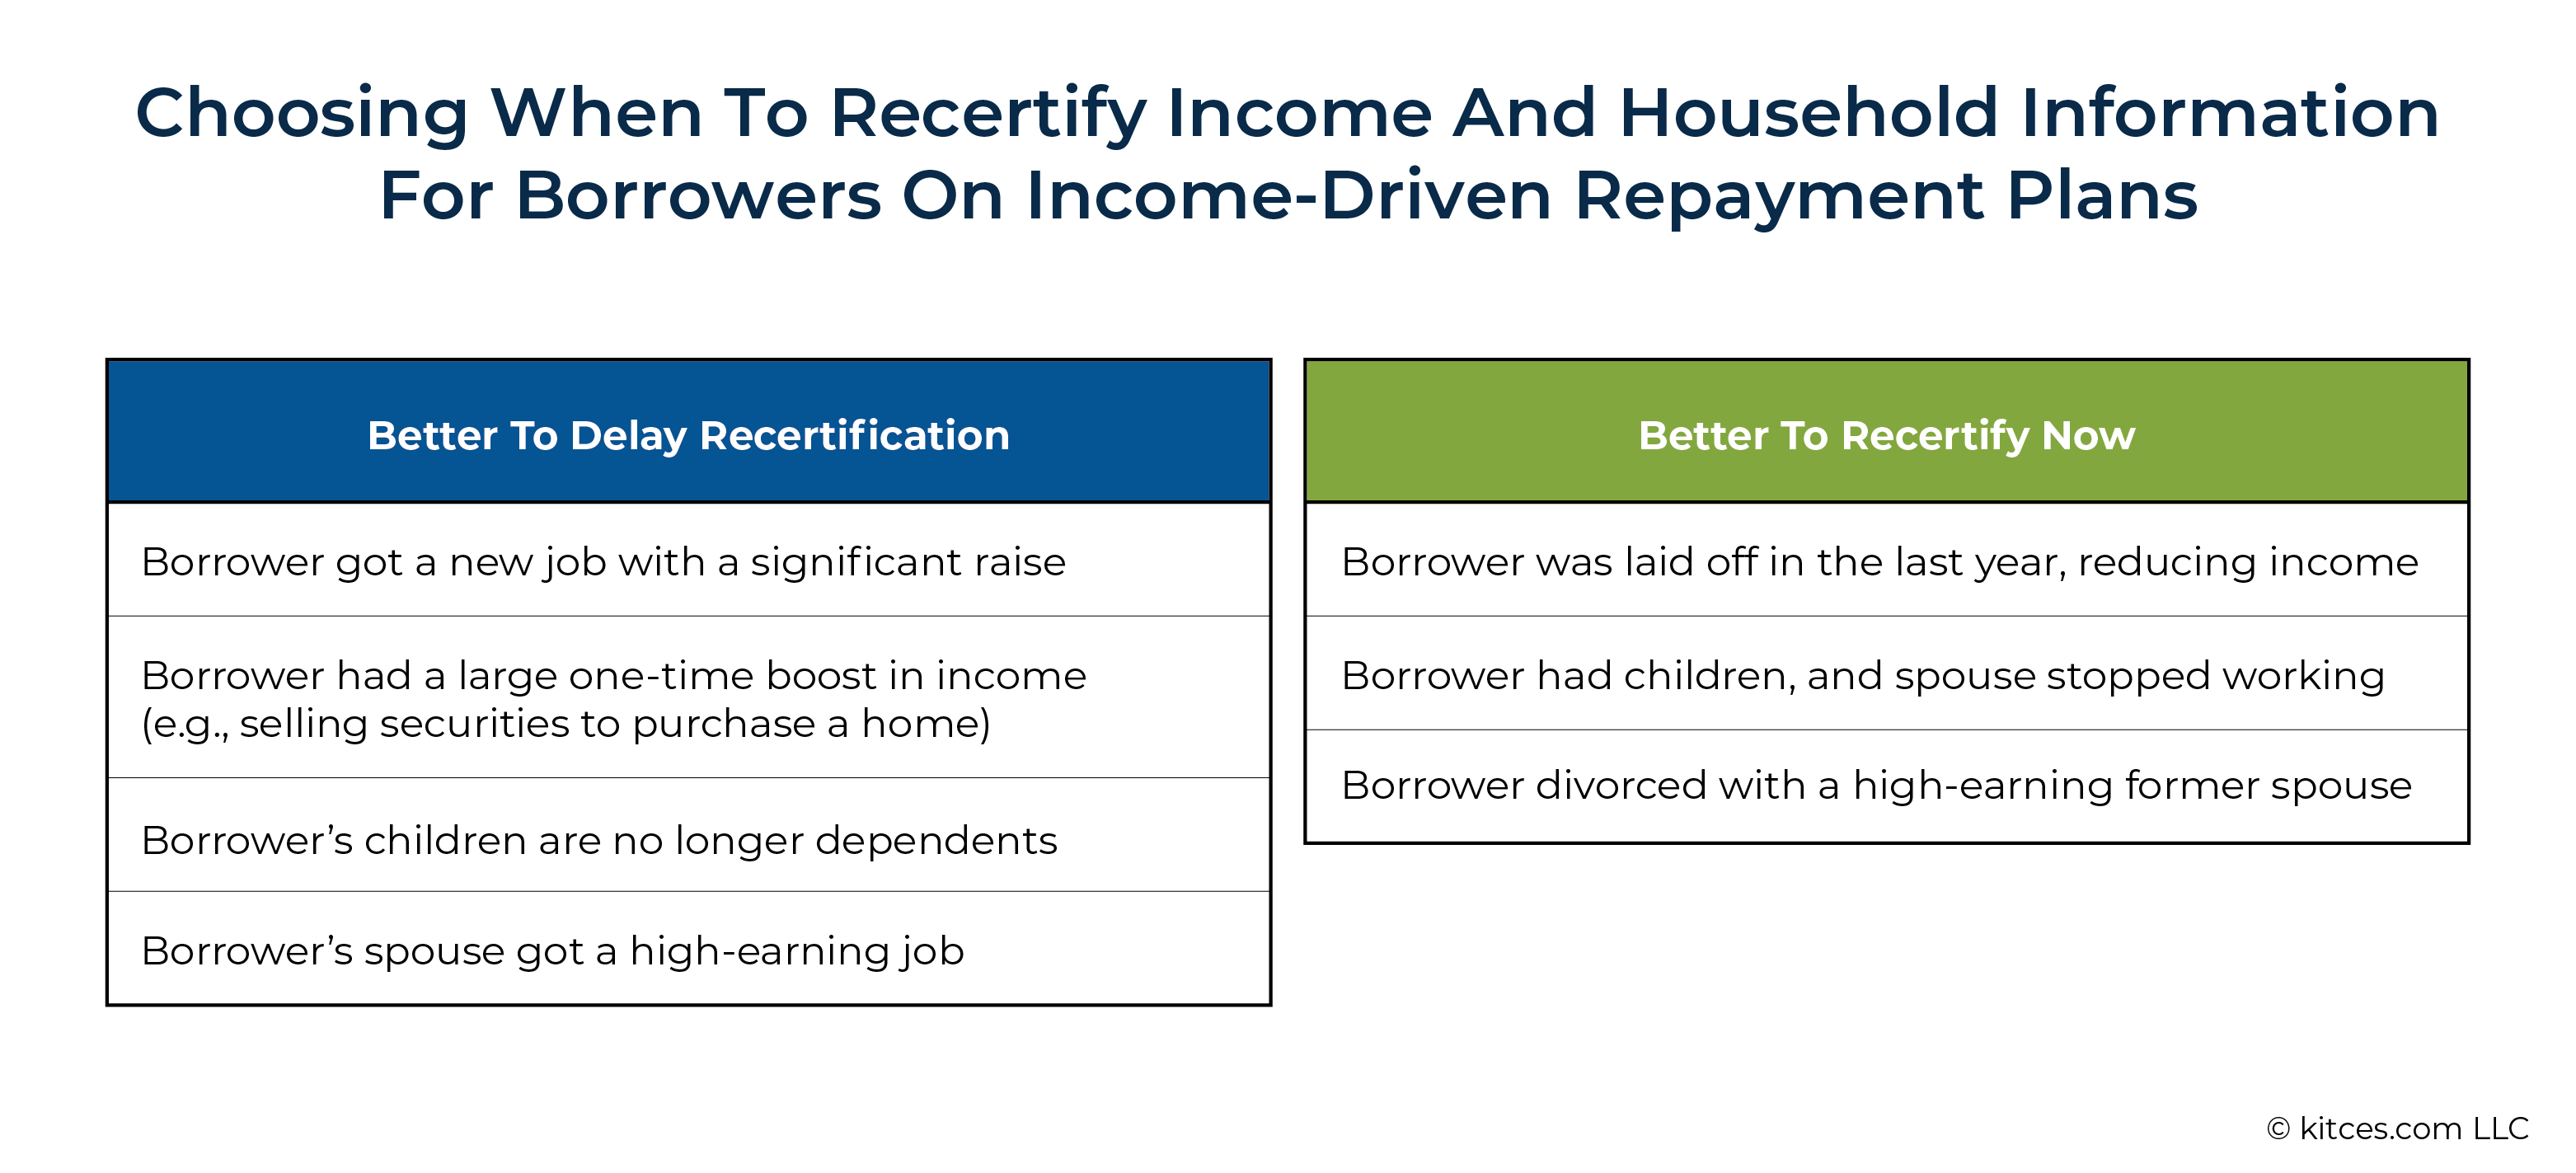 Choosing When To Recertify Income And Household Information For Borrowers On Income Driven Repayment Plans